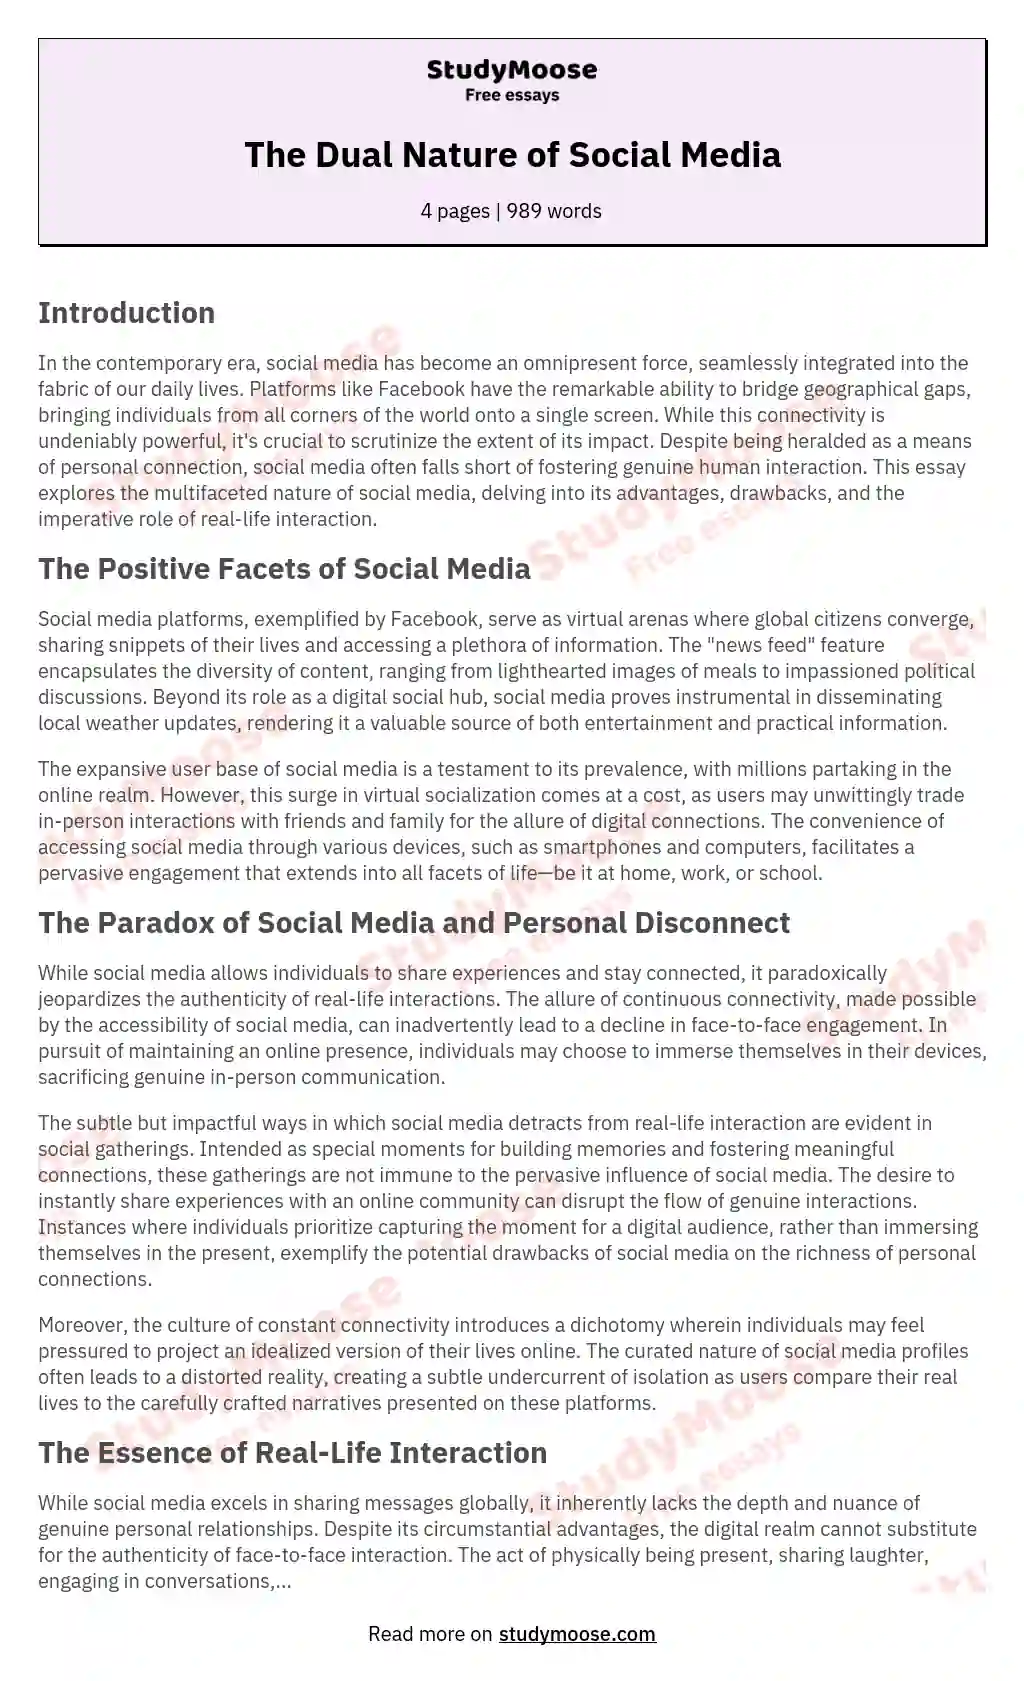 discussion essay about social media